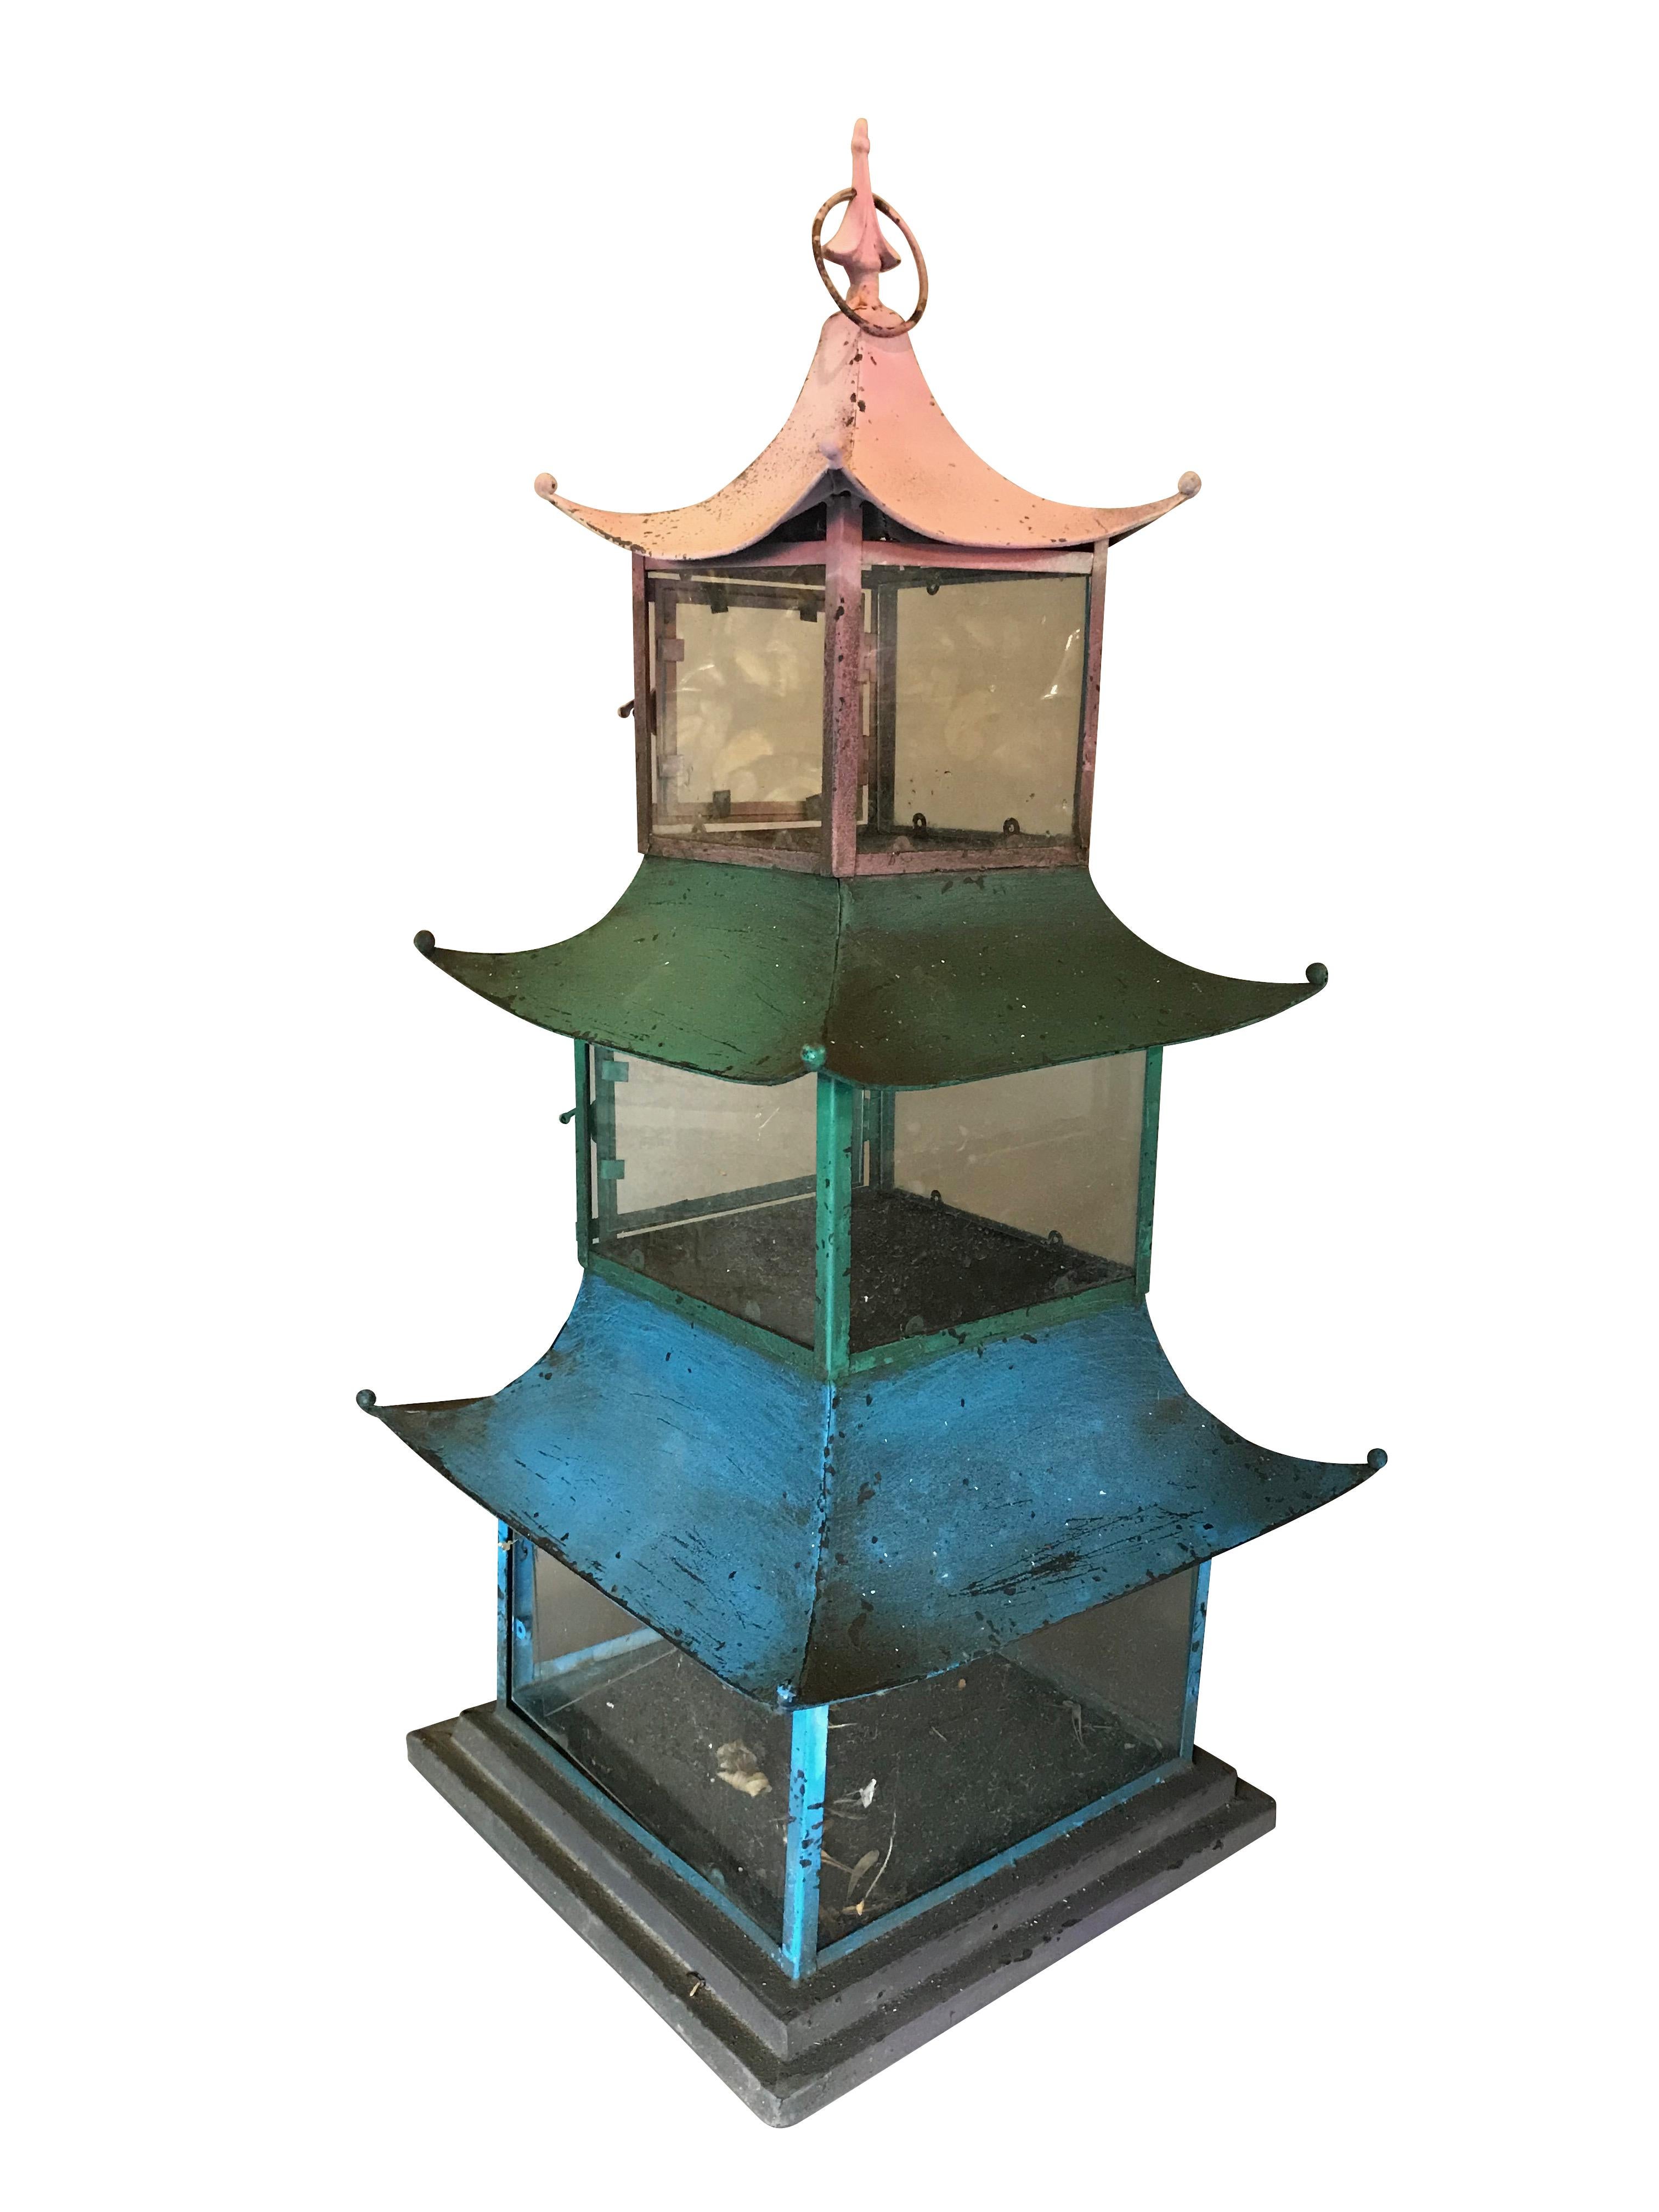 Pair of 1940s Japanese painted pagoda/lanterns.

Having the original paint and glass 

Measures: Height 36